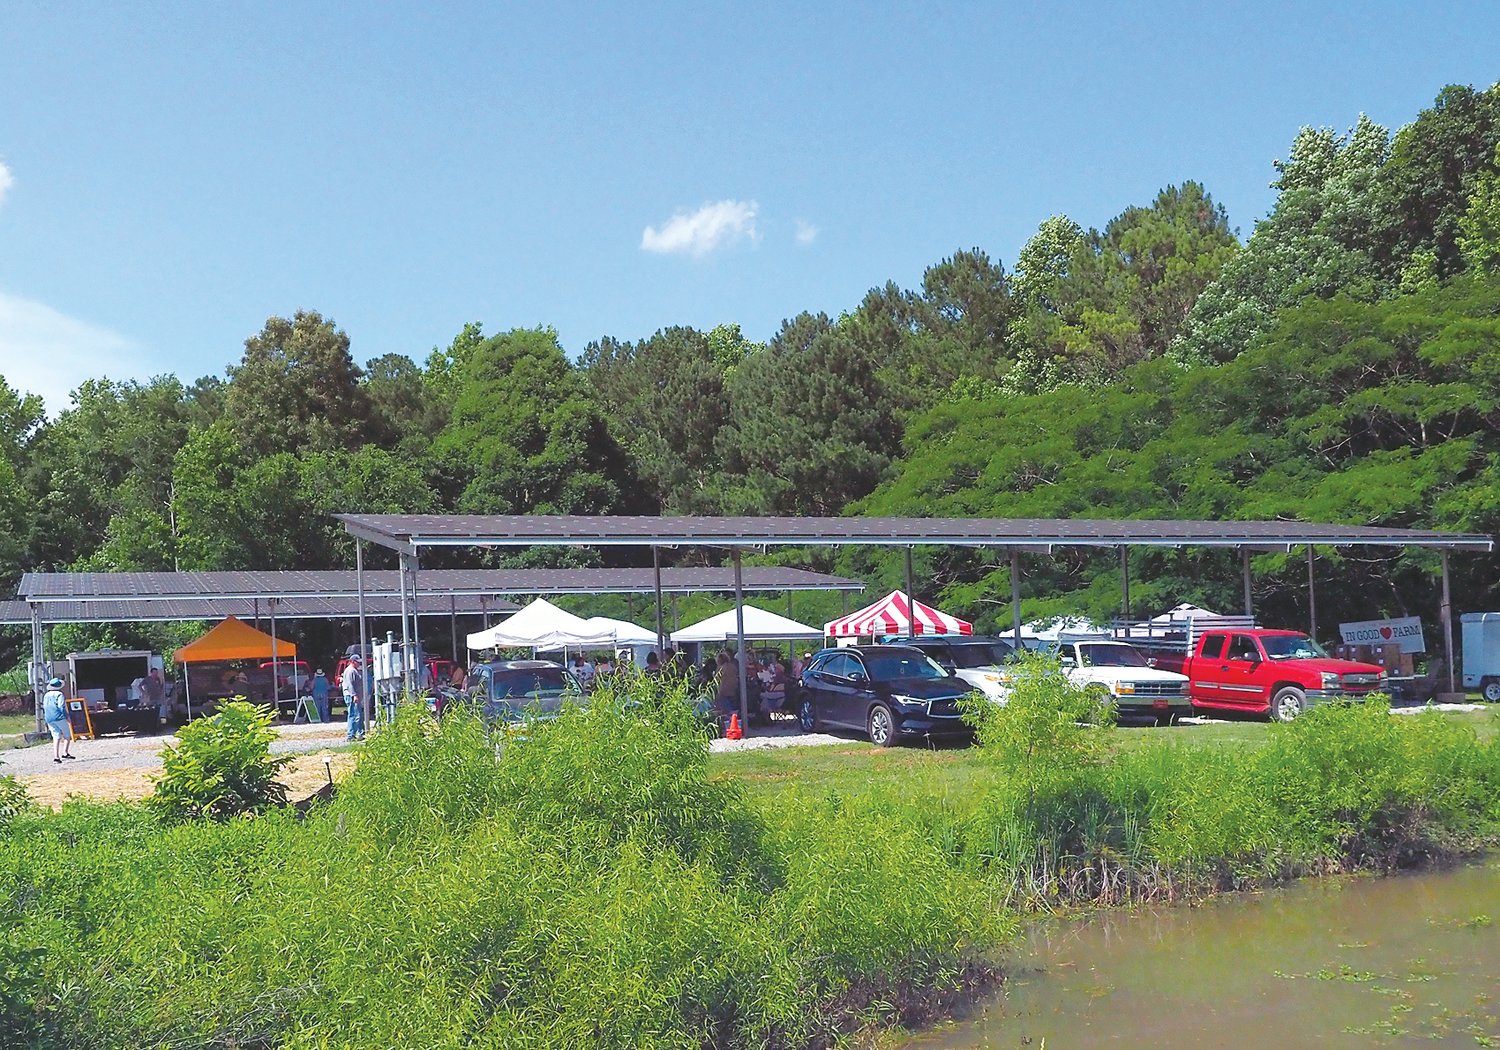 The Plant hosts lots of events, including — as of this month — the Pittsboro Farmers Market.